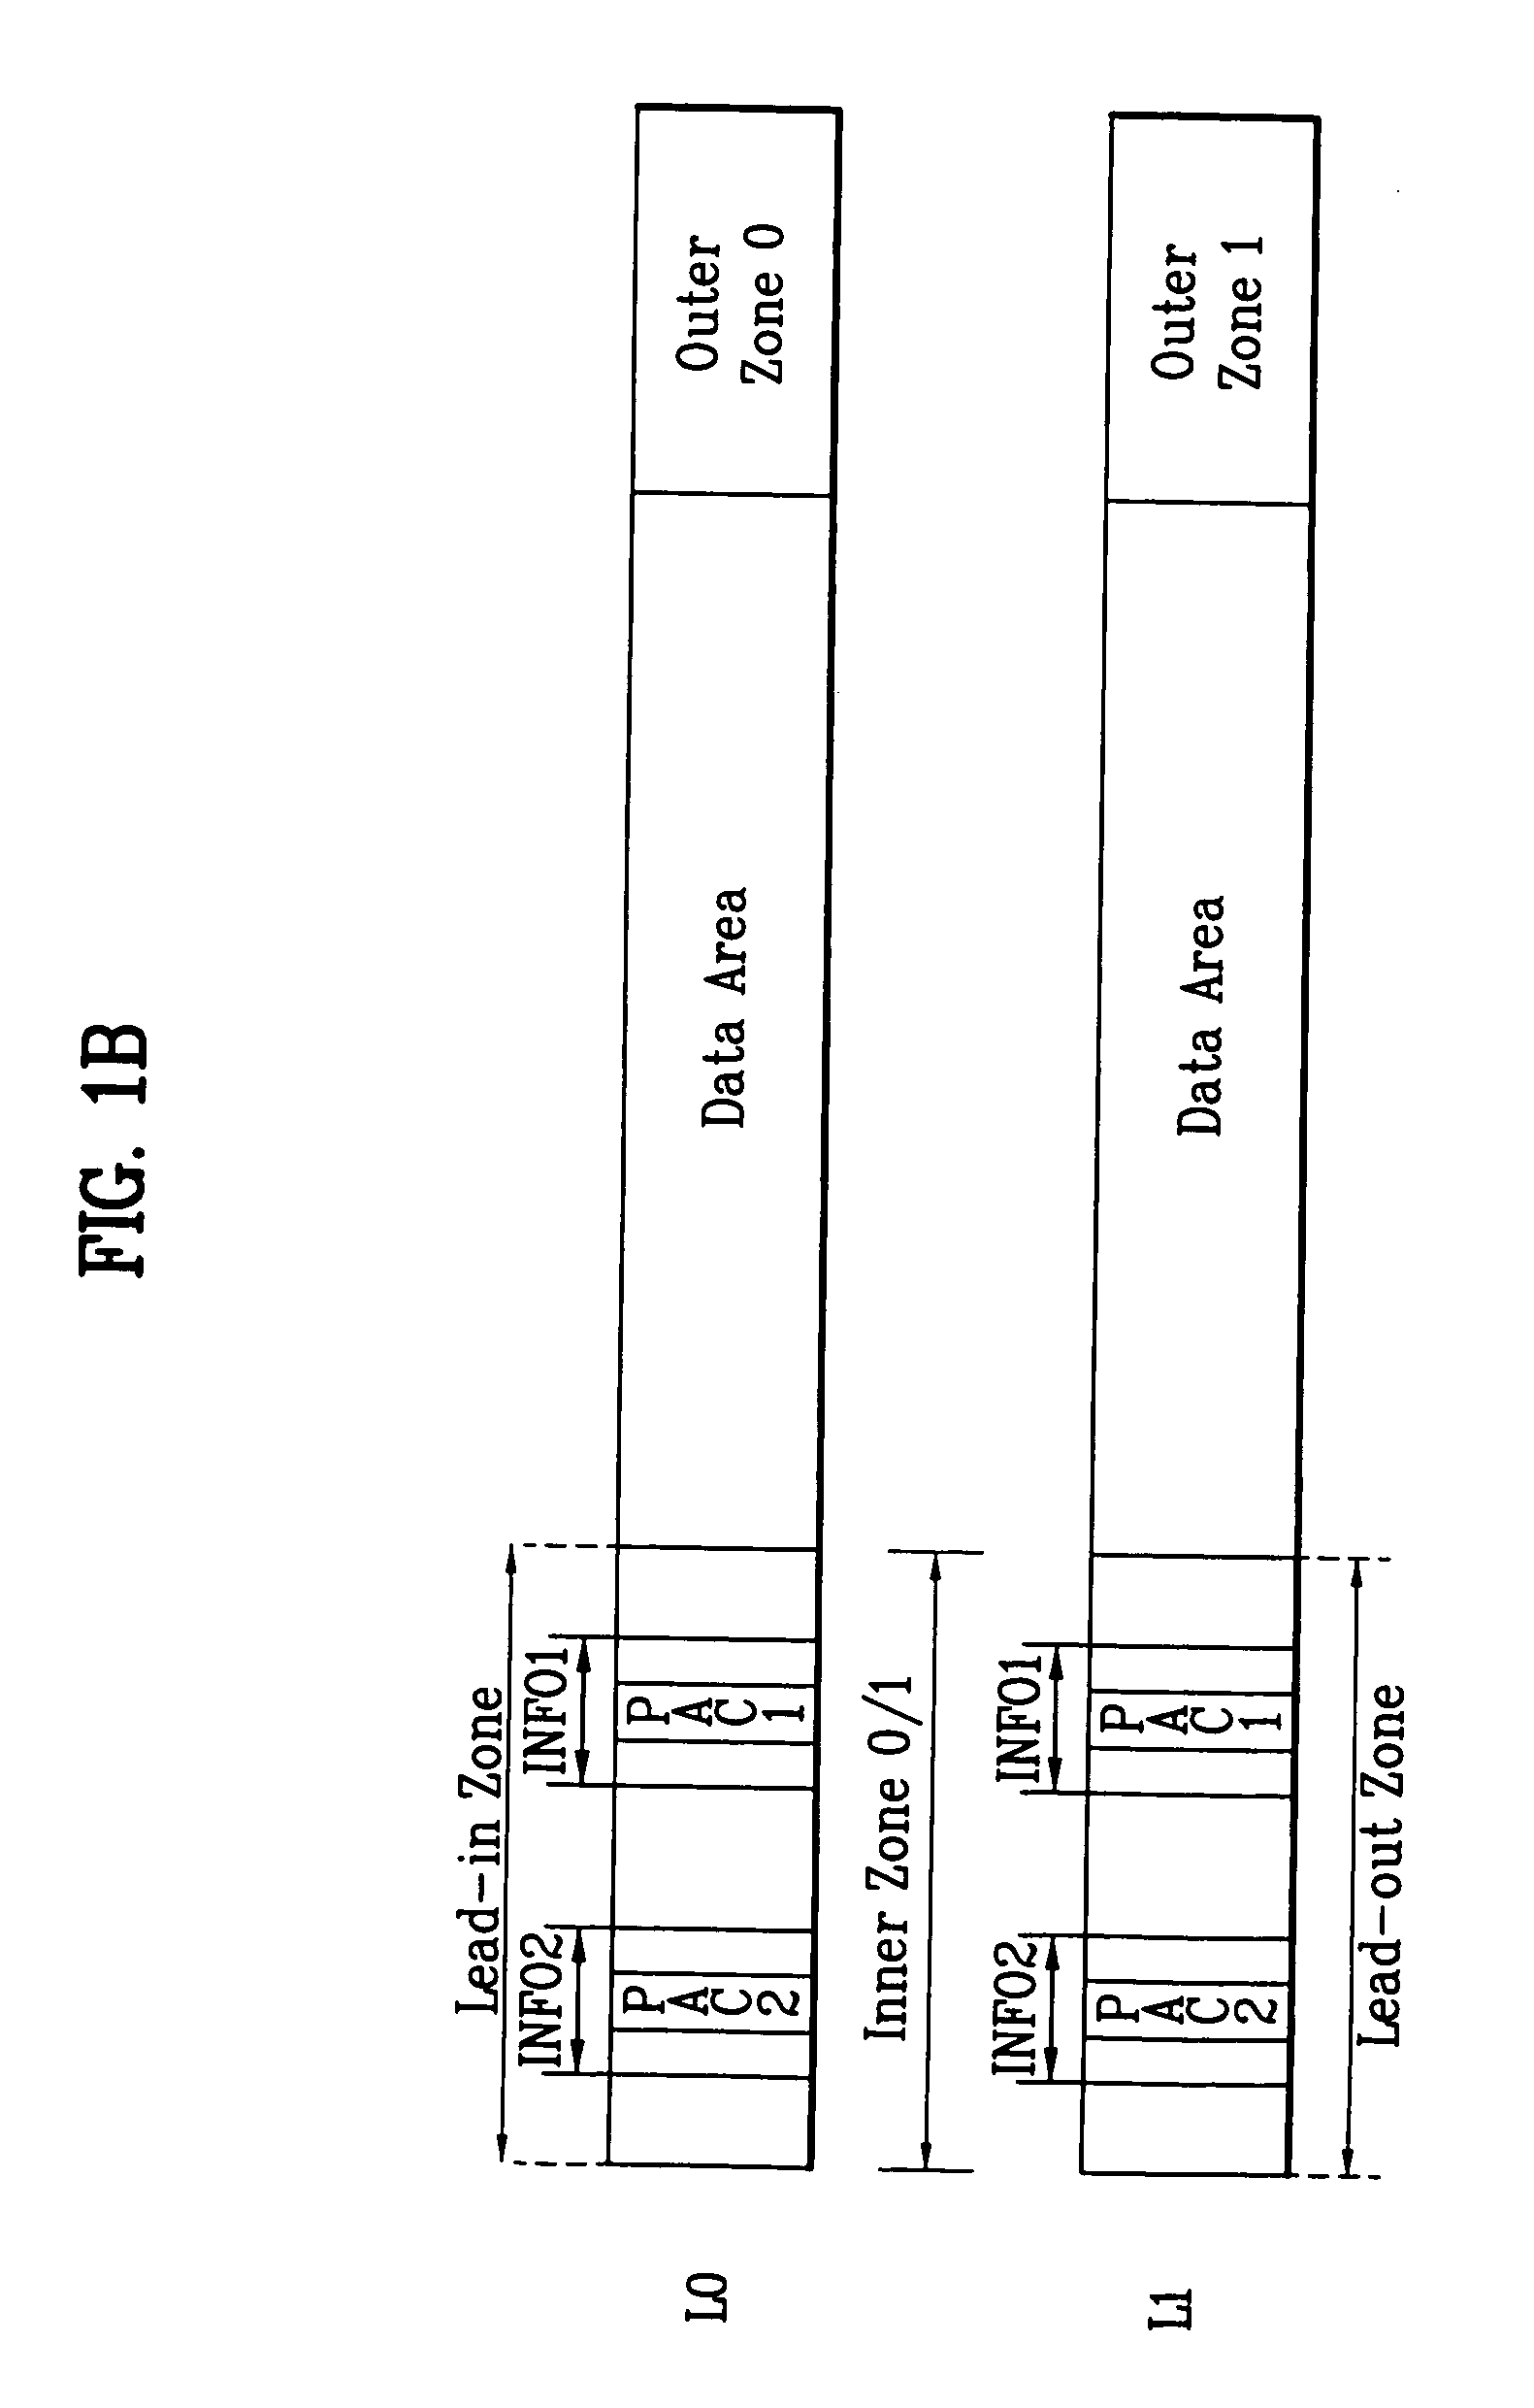 Recording medium with overlapping segment information thereon and apparatus and methods for forming, recording, and reproducing the recording medium